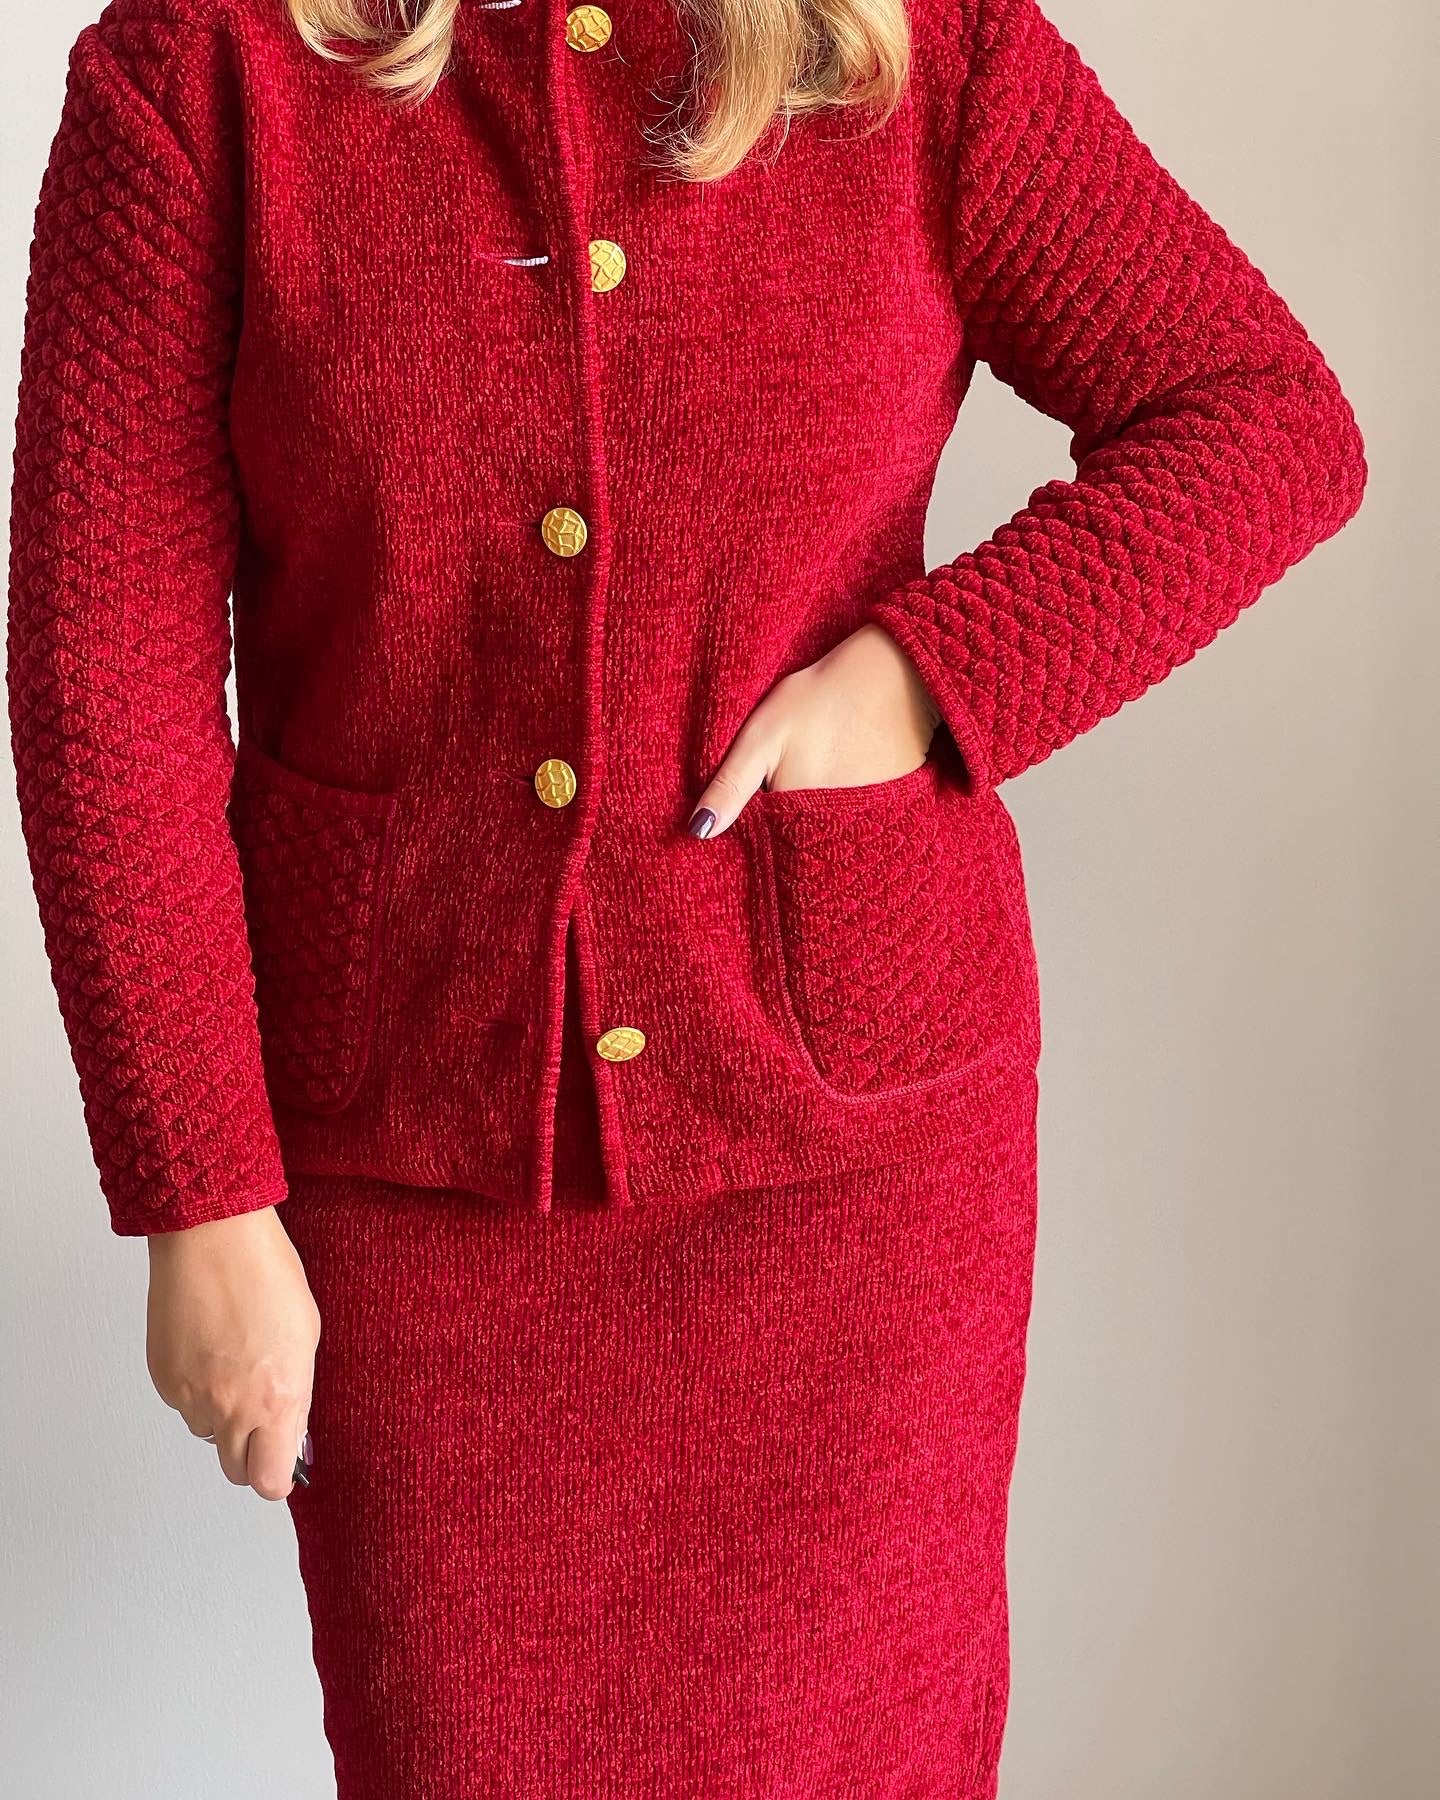 Vintage red suit with accent gold tone buttons (1980s).